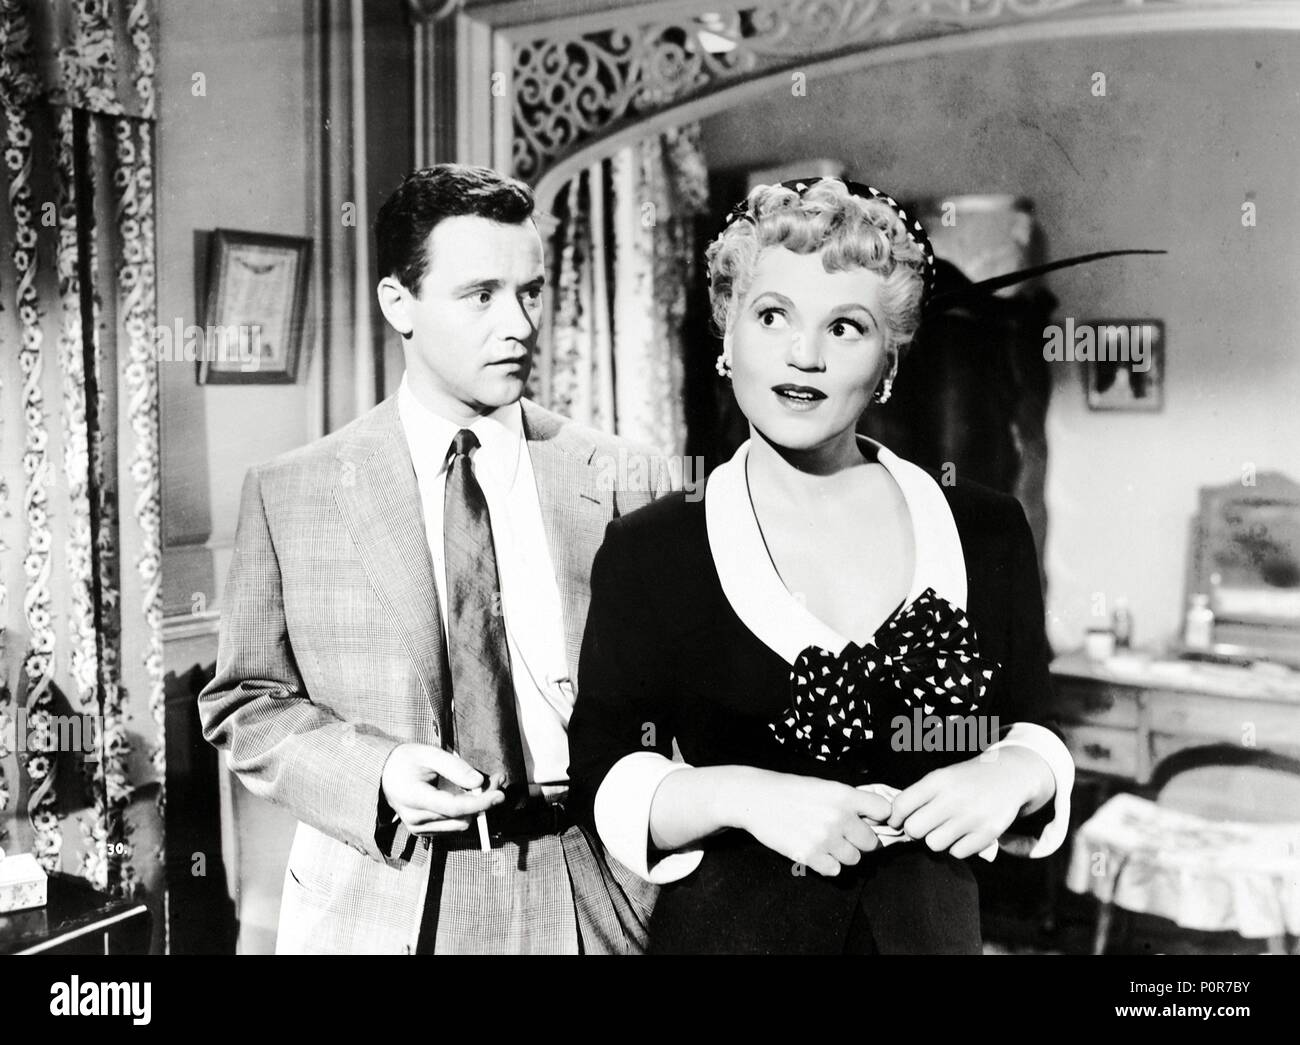 https://c8.alamy.com/comp/P0R7BY/original-film-title-it-should-happen-to-you-english-title-it-should-happen-to-you-film-director-george-cukor-year-1954-stars-judy-holliday-jack-lemmon-credit-columbia-pictures-album-P0R7BY.jpg